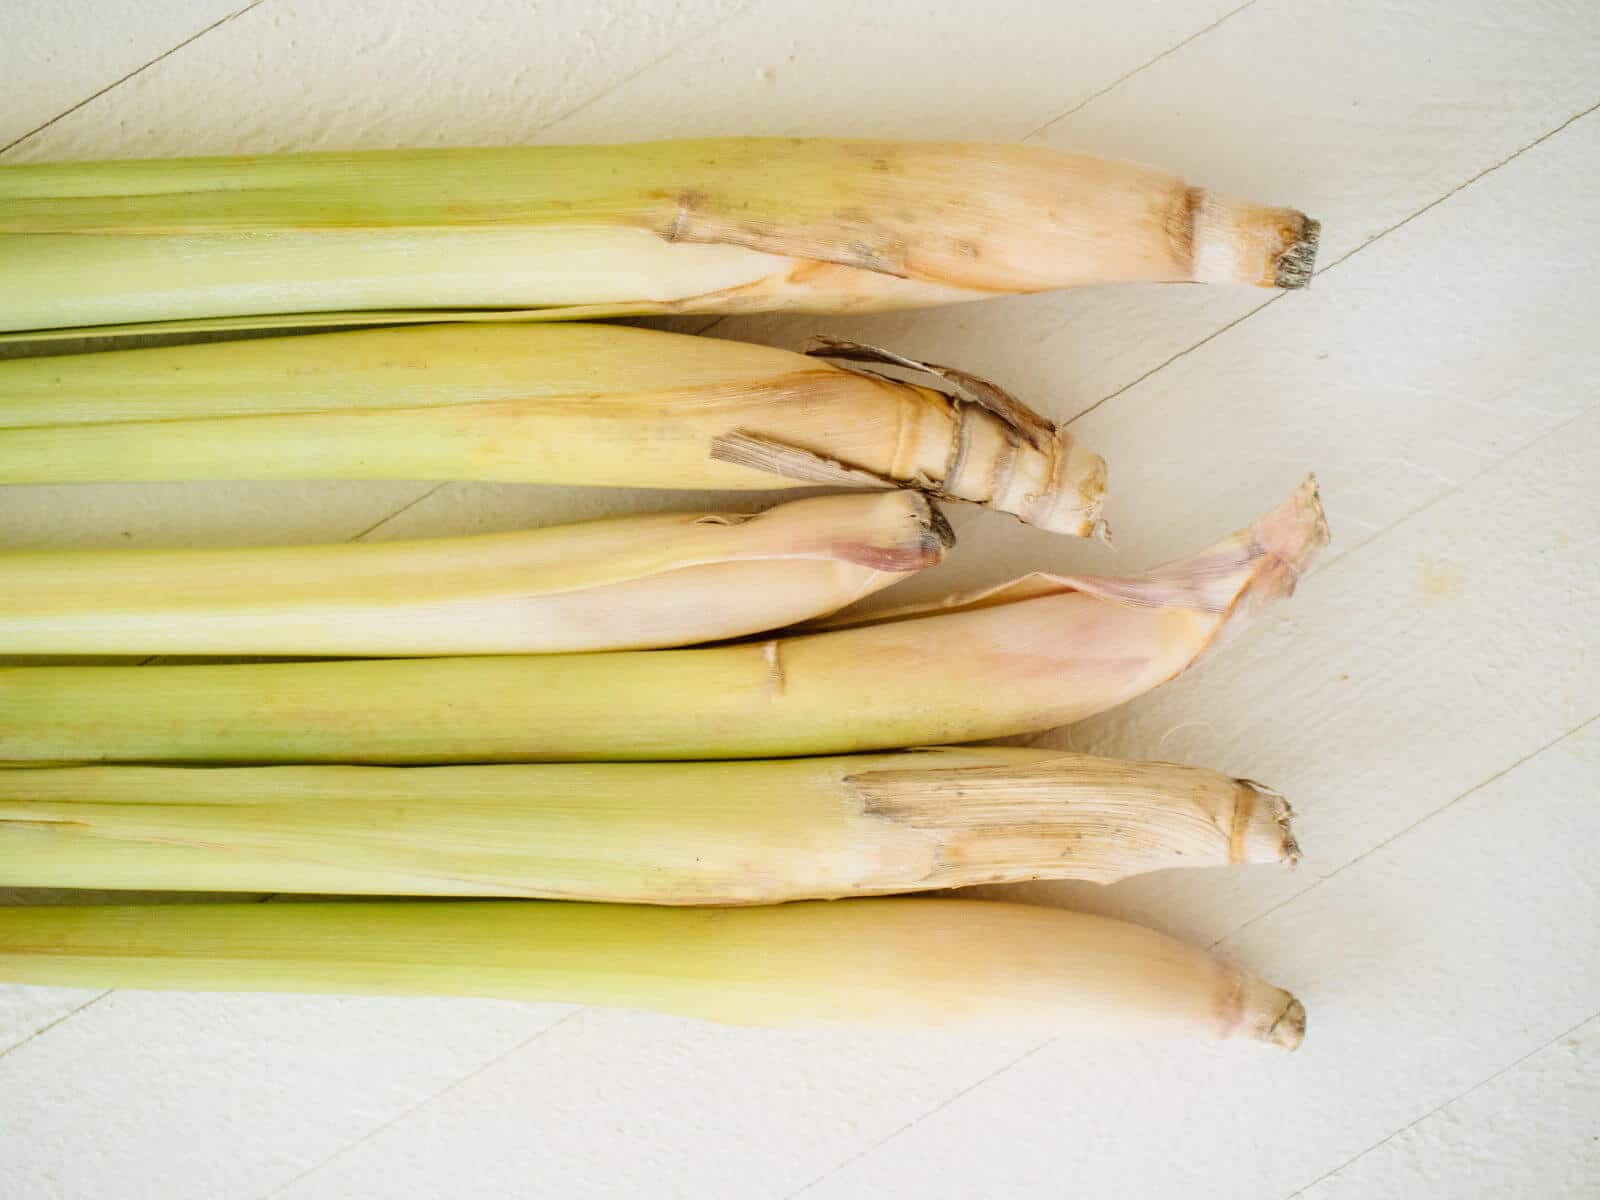 Use healthy lemongrass stalks with the base intact